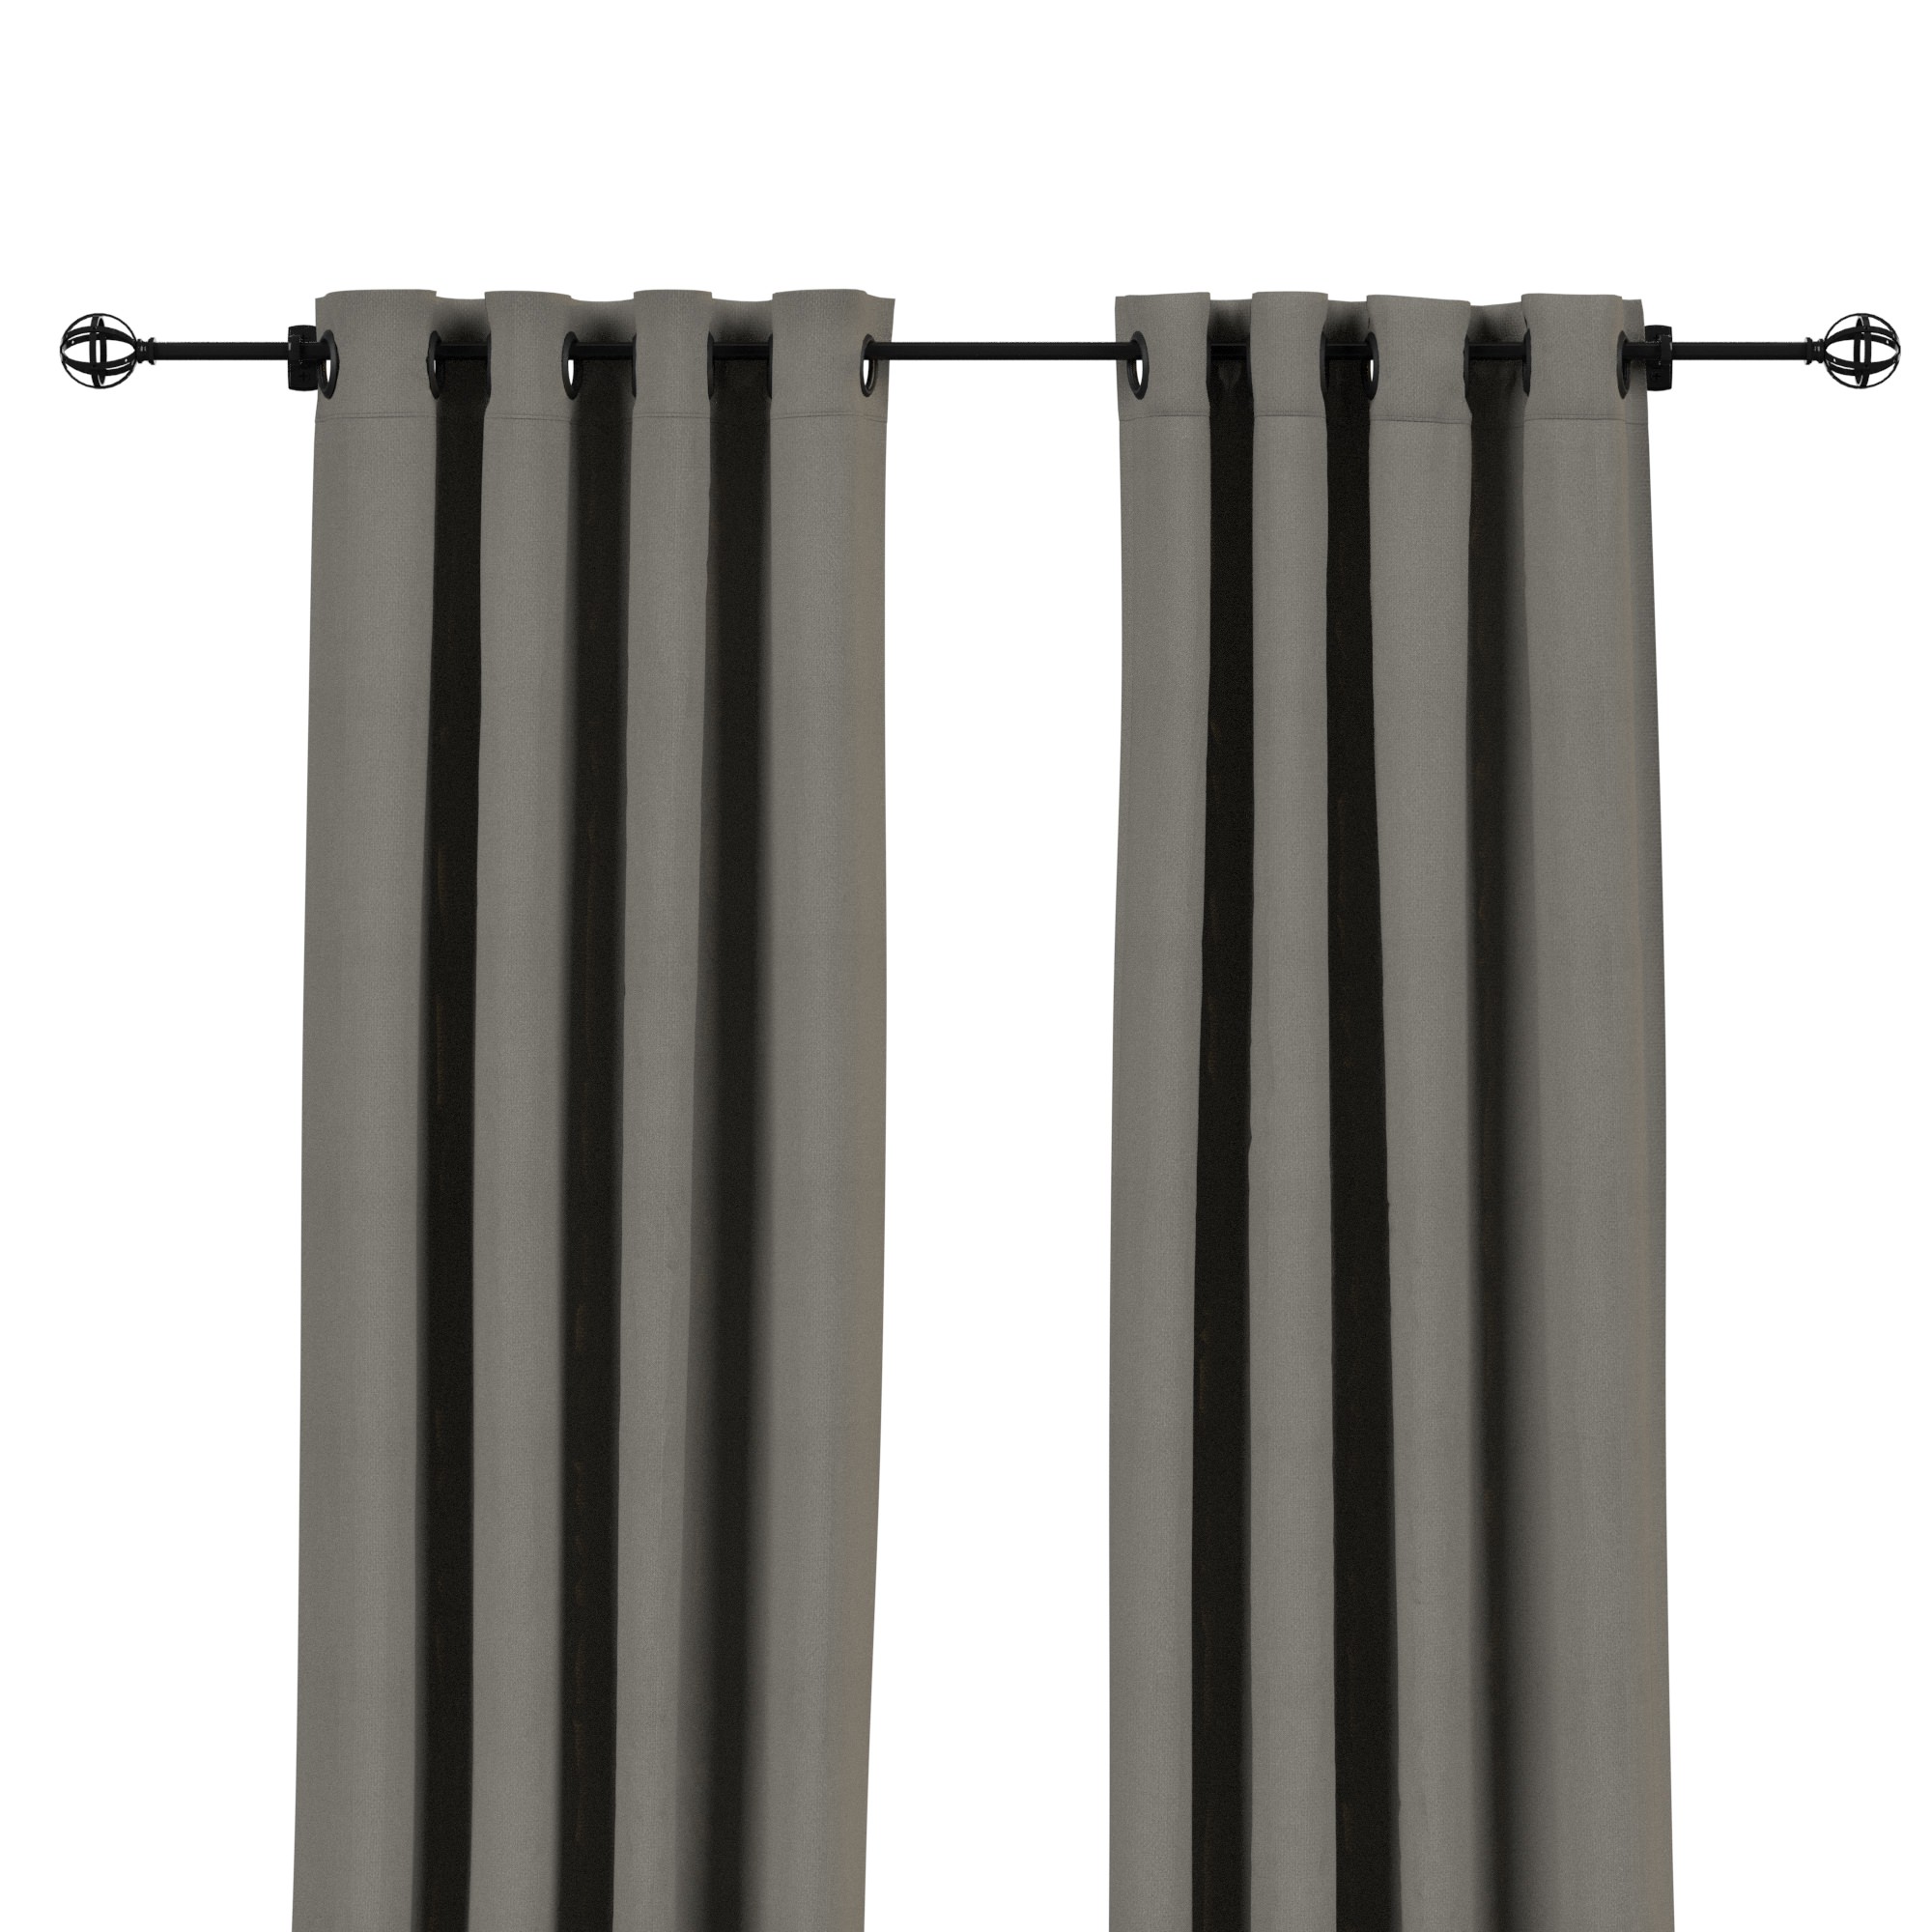 Sunbrella Canvas Charcoal Outdoor with Nickel Grommets